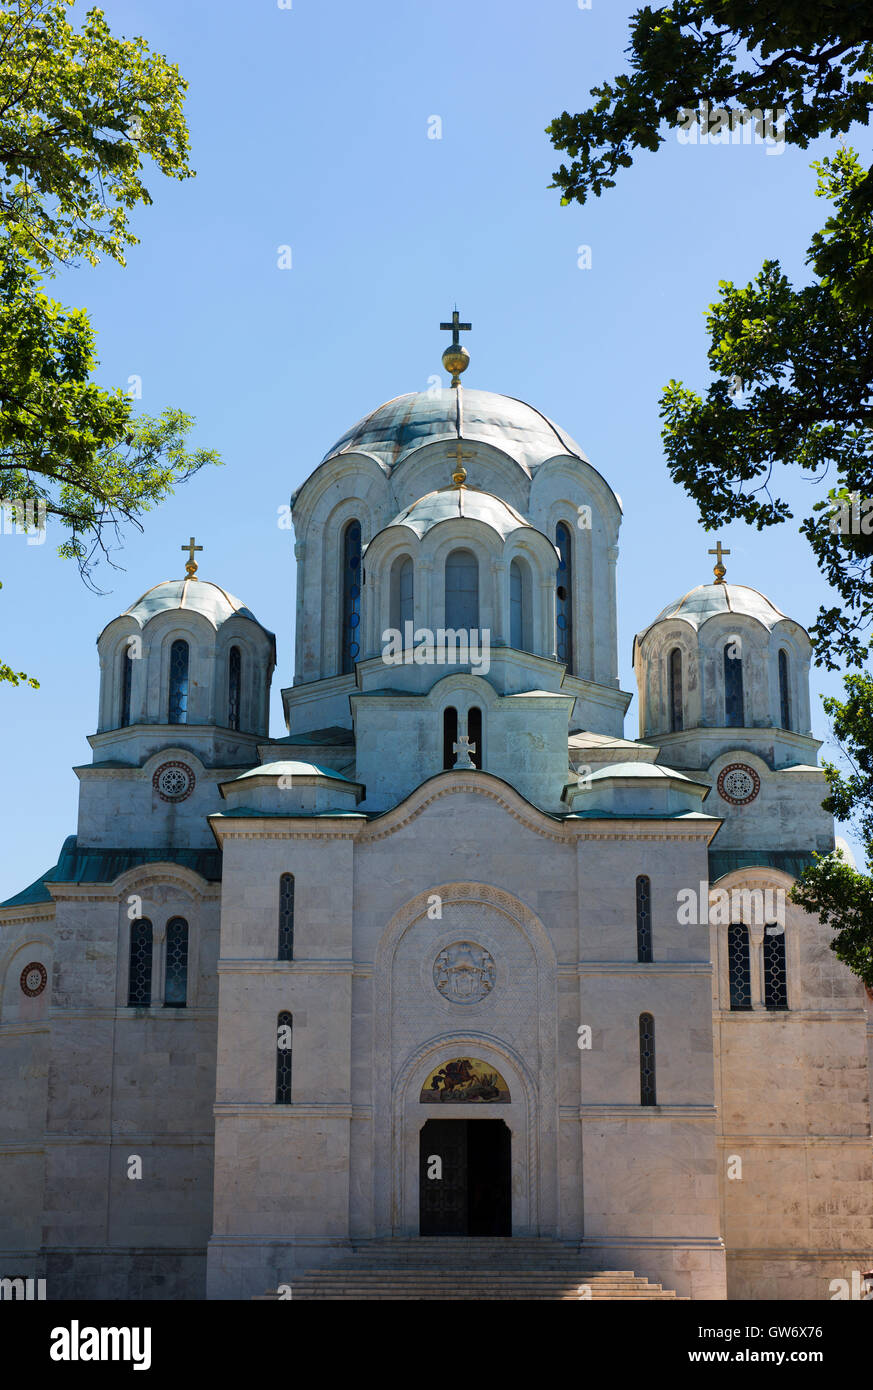 Exterior of St George's Church, also known as Oplenac, the mausoleum of the royal house of Karadordevic. Stock Photo